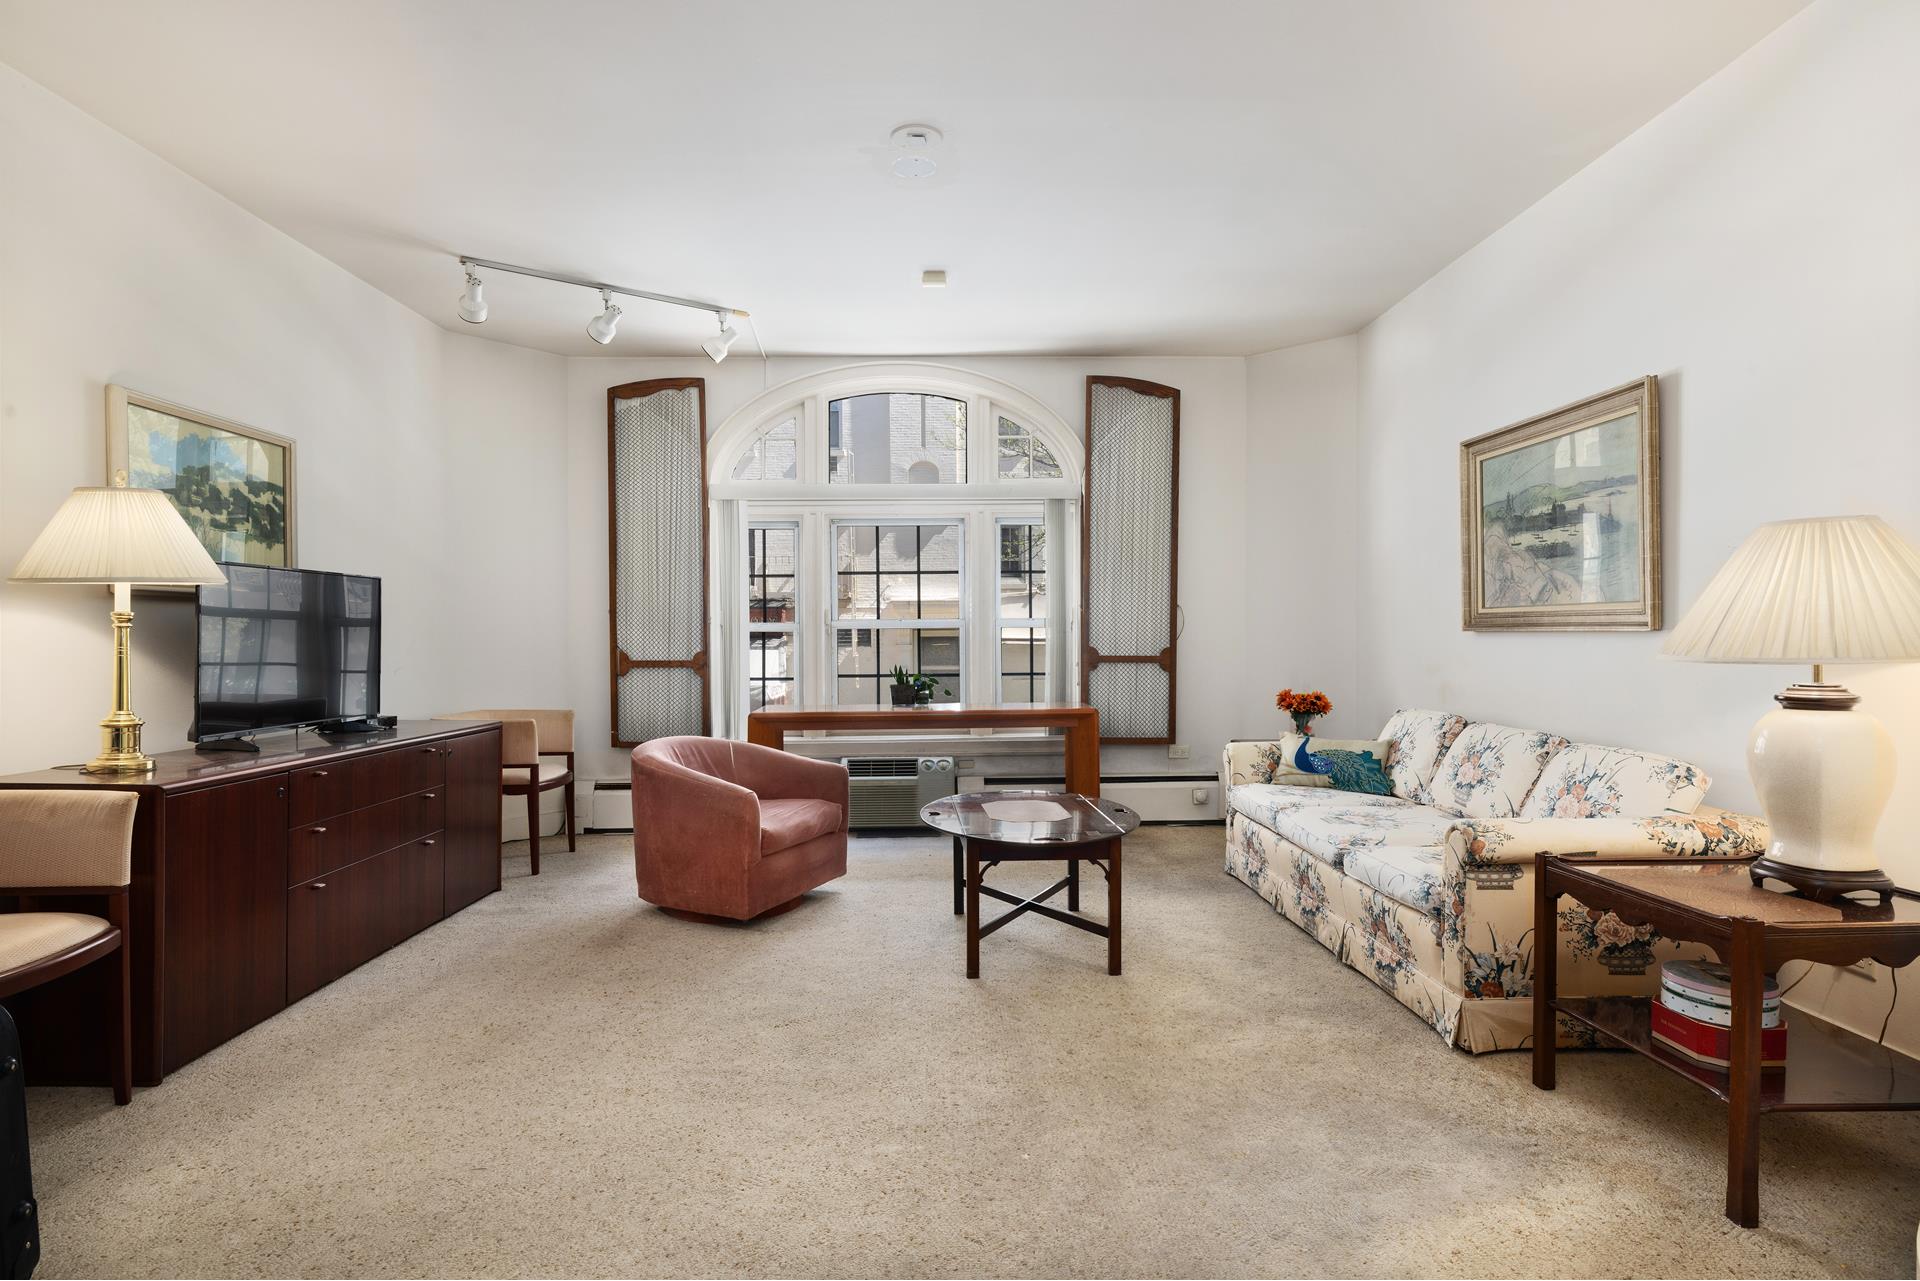 168 East 75th Street, Lenox Hill, Upper East Side, NYC - 4 Bedrooms  
4.5 Bathrooms  
10 Rooms - 